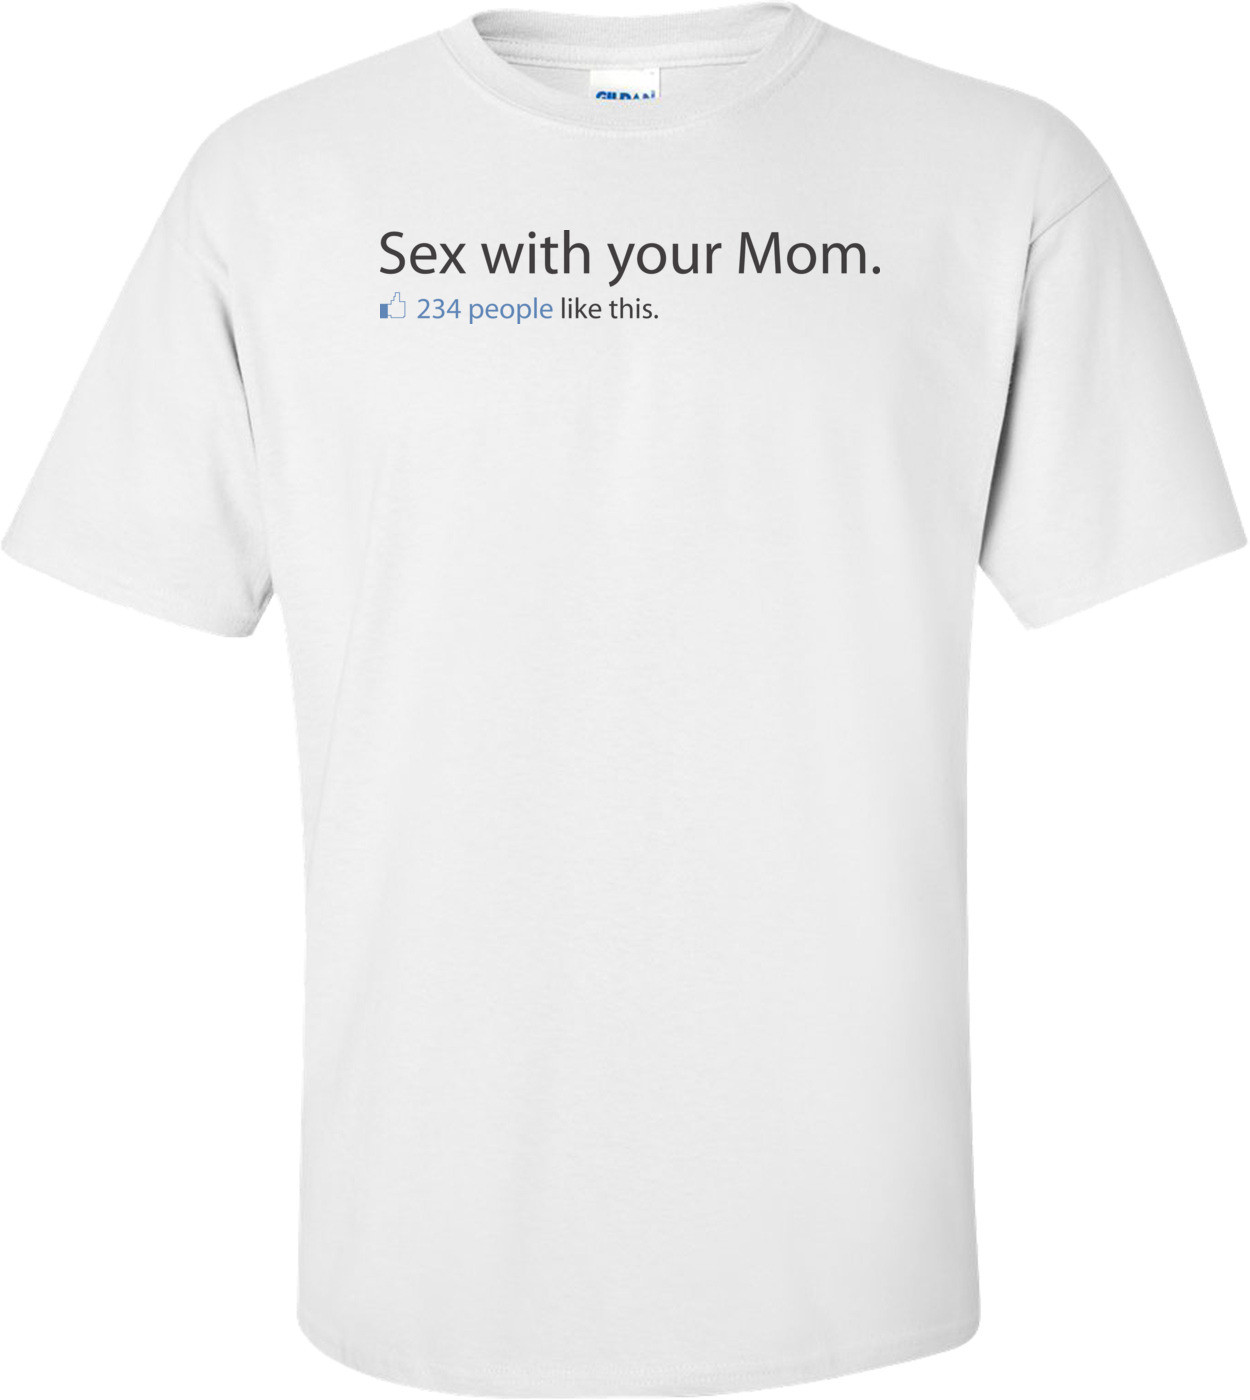 Sex With Your Mom Facebook Status T-shirt